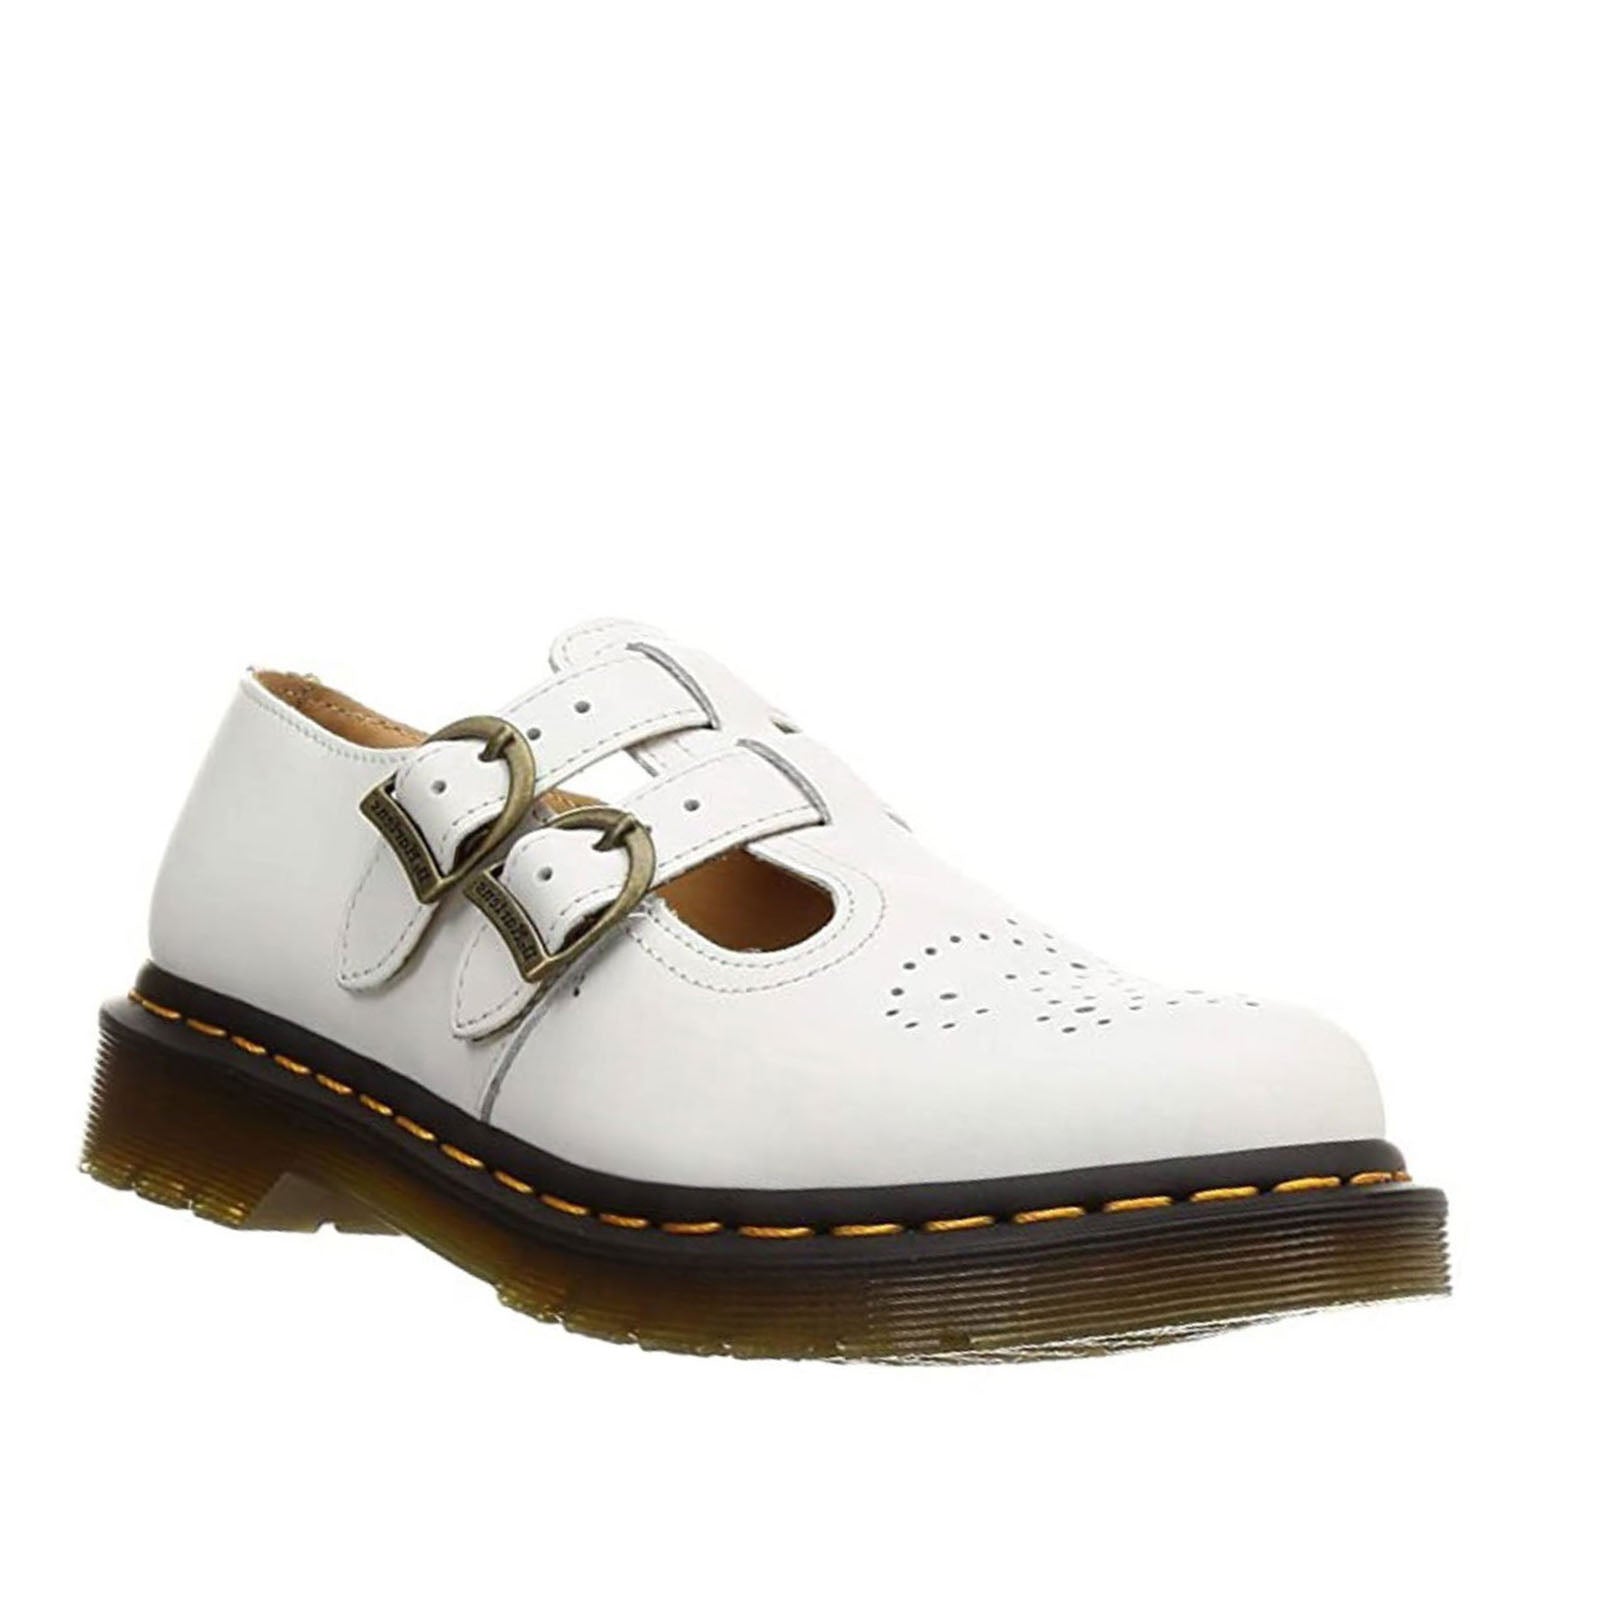 Dr. Martens 8065 Mary Jane 26563100 (White Smooth)